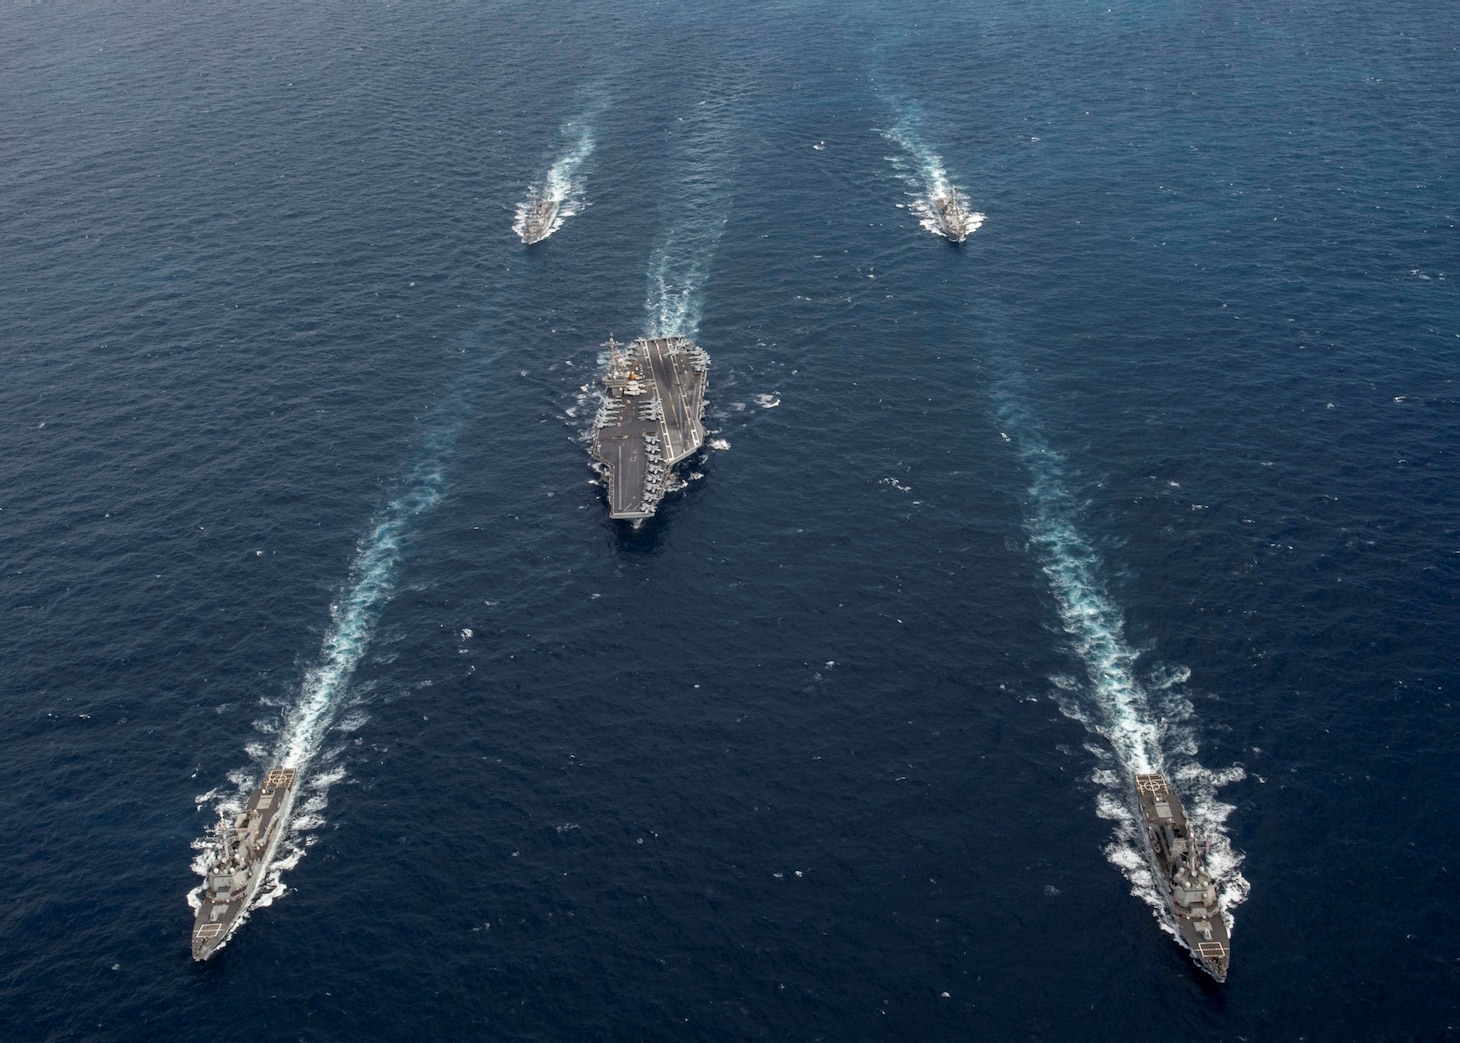 Ships from the George H.W. Bush Carrier Strike Group (GHWBCSG) transit the Atlantic Ocean following a straits transit training event. GHWBCSG is underway completing Group Sail as part of the routine training cycle.